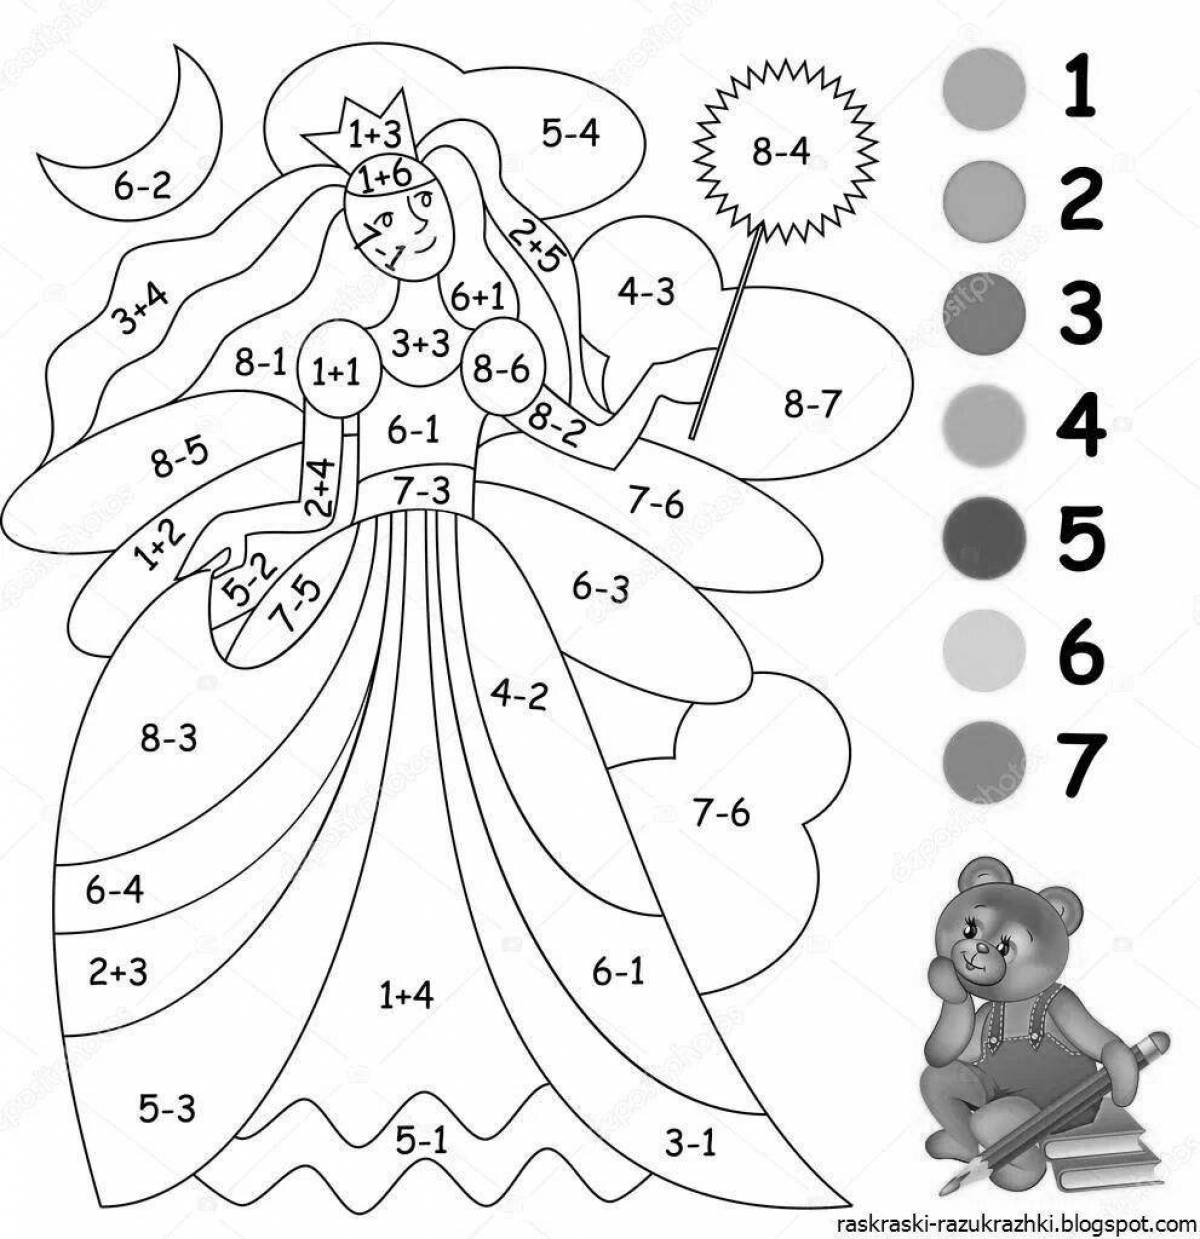 Entertaining math coloring book for kids 5-6 years old